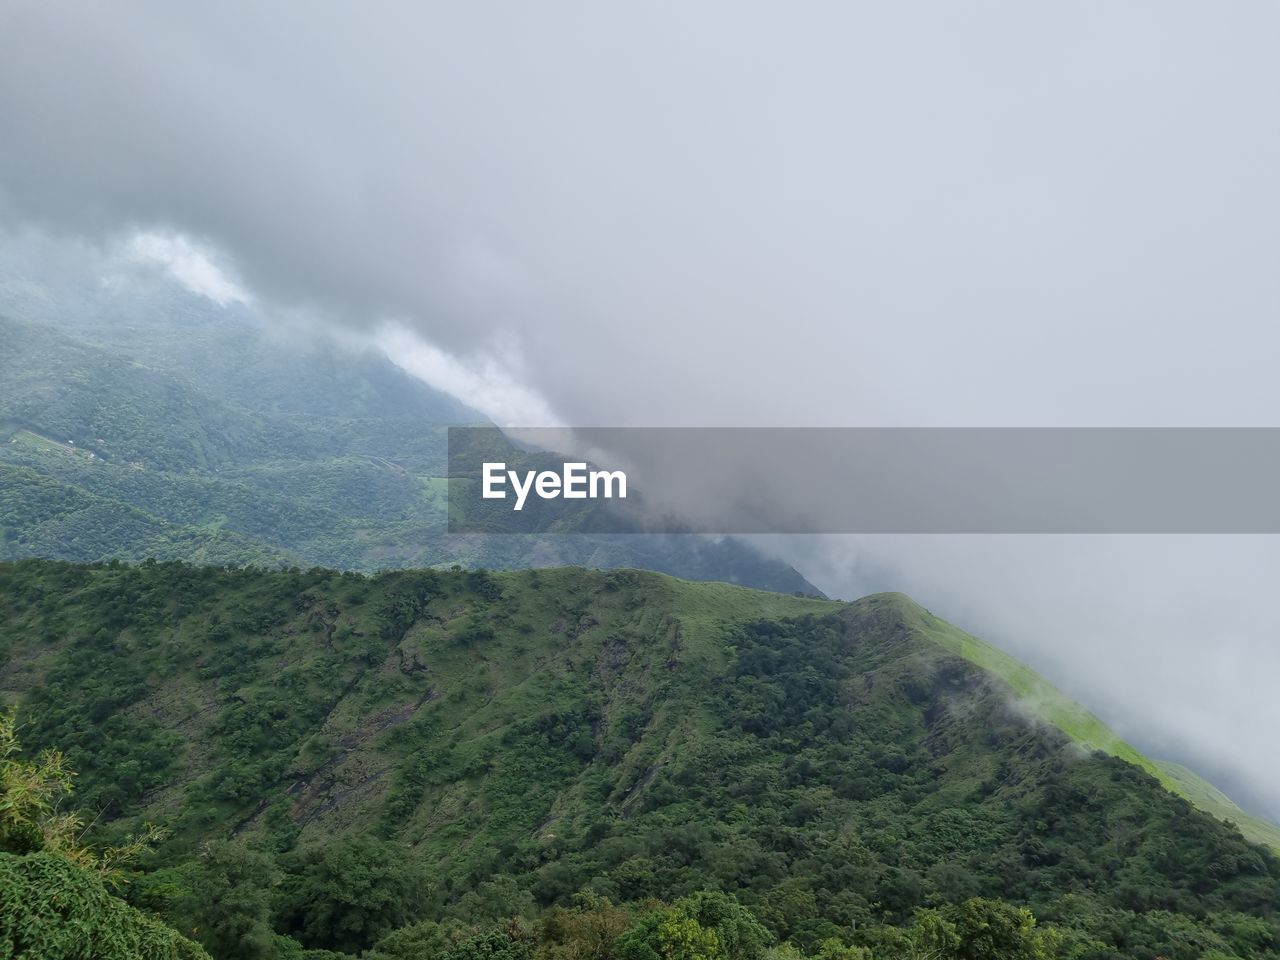 environment, mountain, cloud, scenics - nature, fog, landscape, beauty in nature, land, plant, tree, nature, sky, forest, mountain range, no people, green, travel, outdoors, ridge, tourism, travel destinations, social issues, highland, tranquility, non-urban scene, valley, hill station, lush foliage, foliage, overcast, day, mountain peak, tea crop, plateau, tranquil scene, rain, environmental conservation